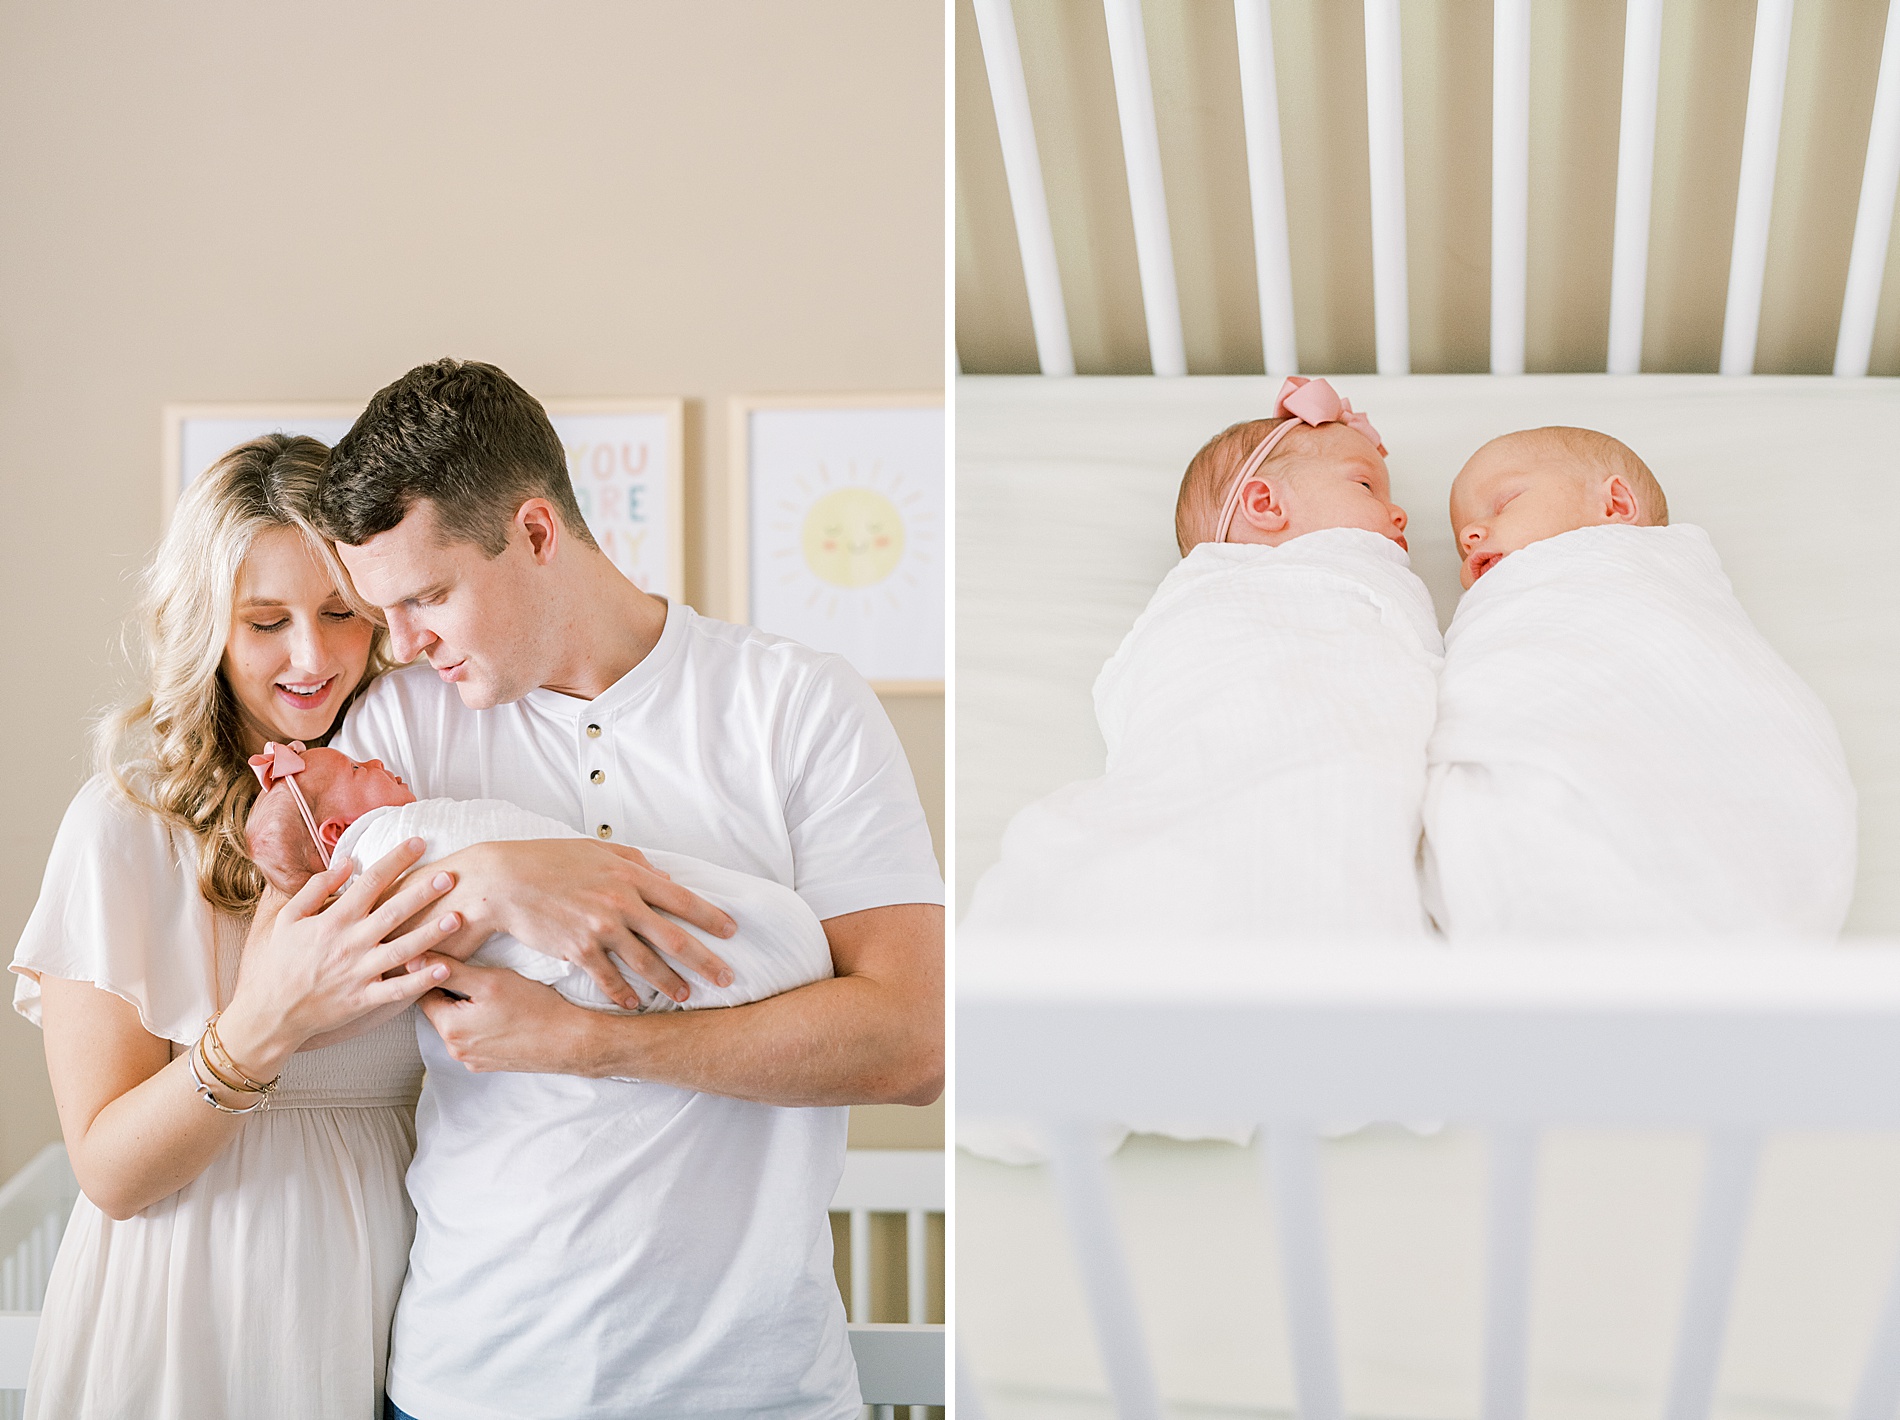 parents admire sleeping twins during In-Home Lifestyle Newborn Session